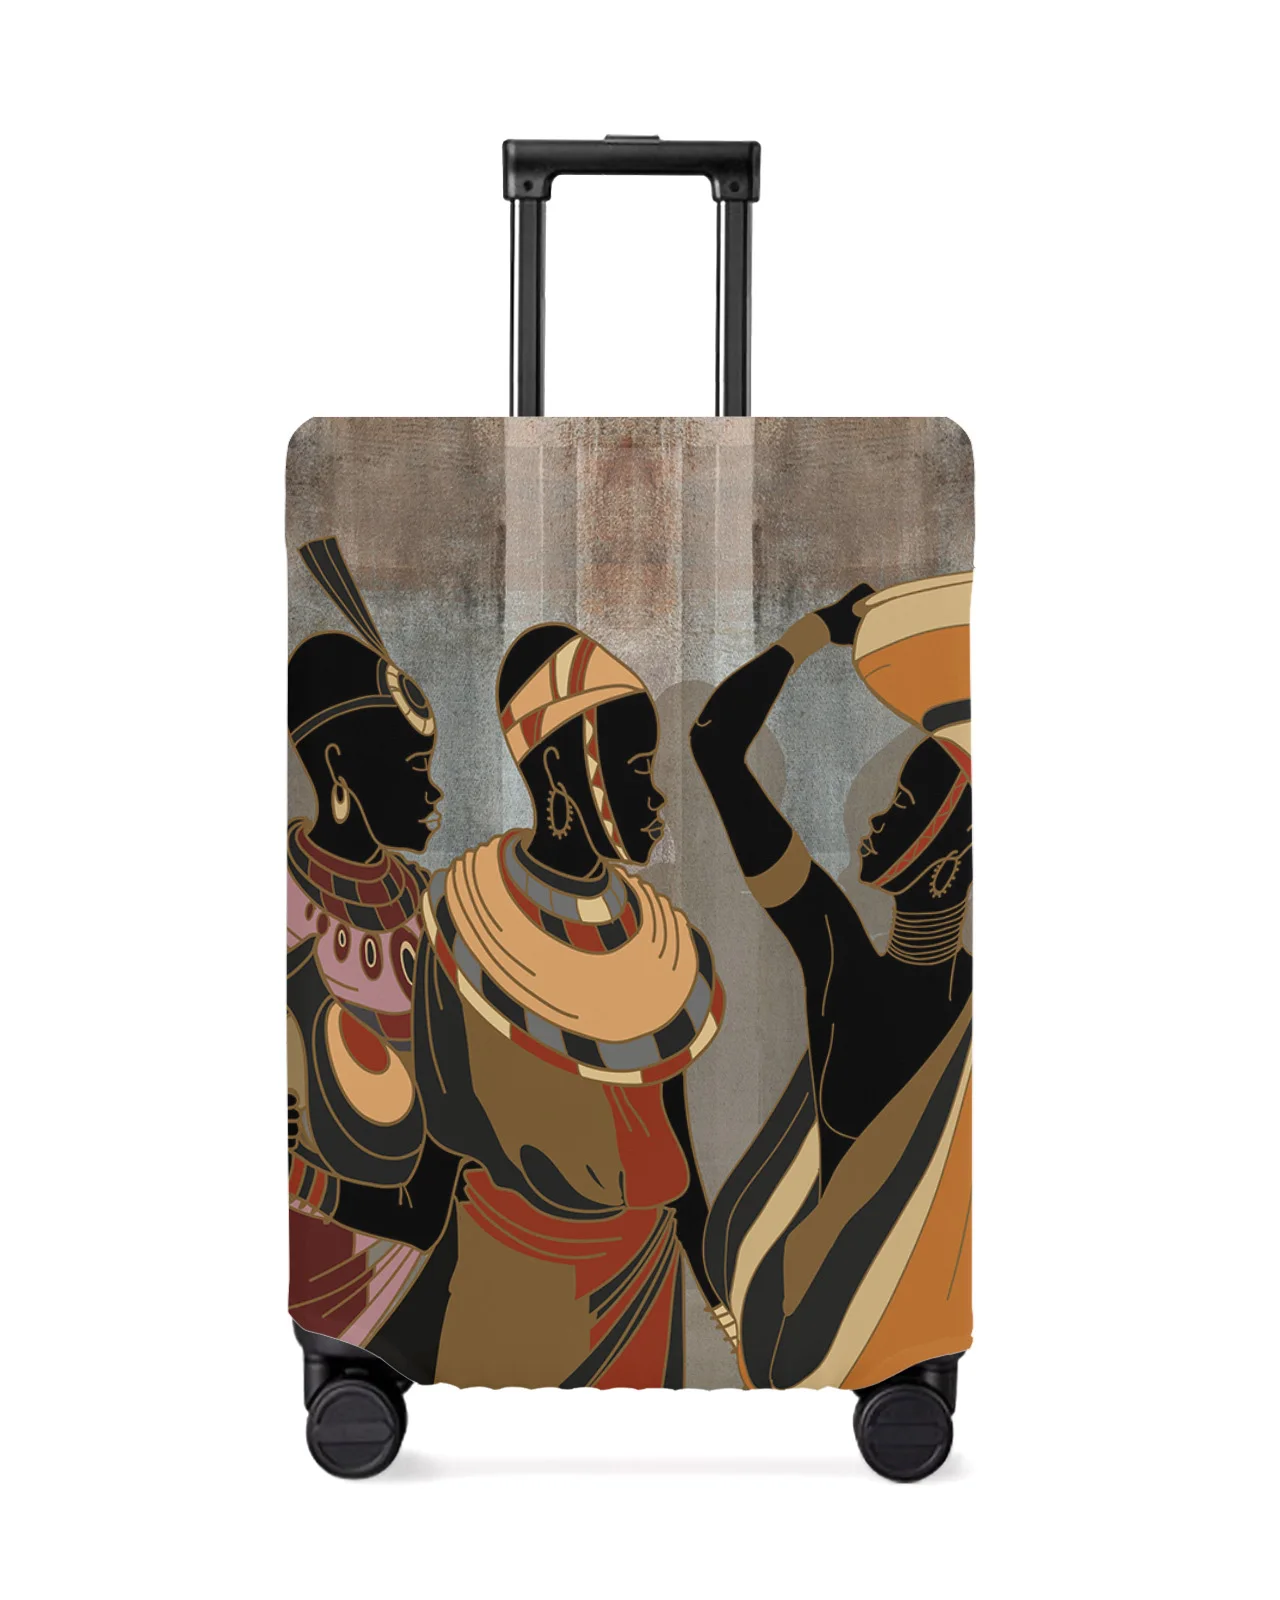 

Ethnic Style African Women Black Women Travel Luggage Cover Elastic Baggage Cover Suitcase Case Dust Cover Travel Accessories